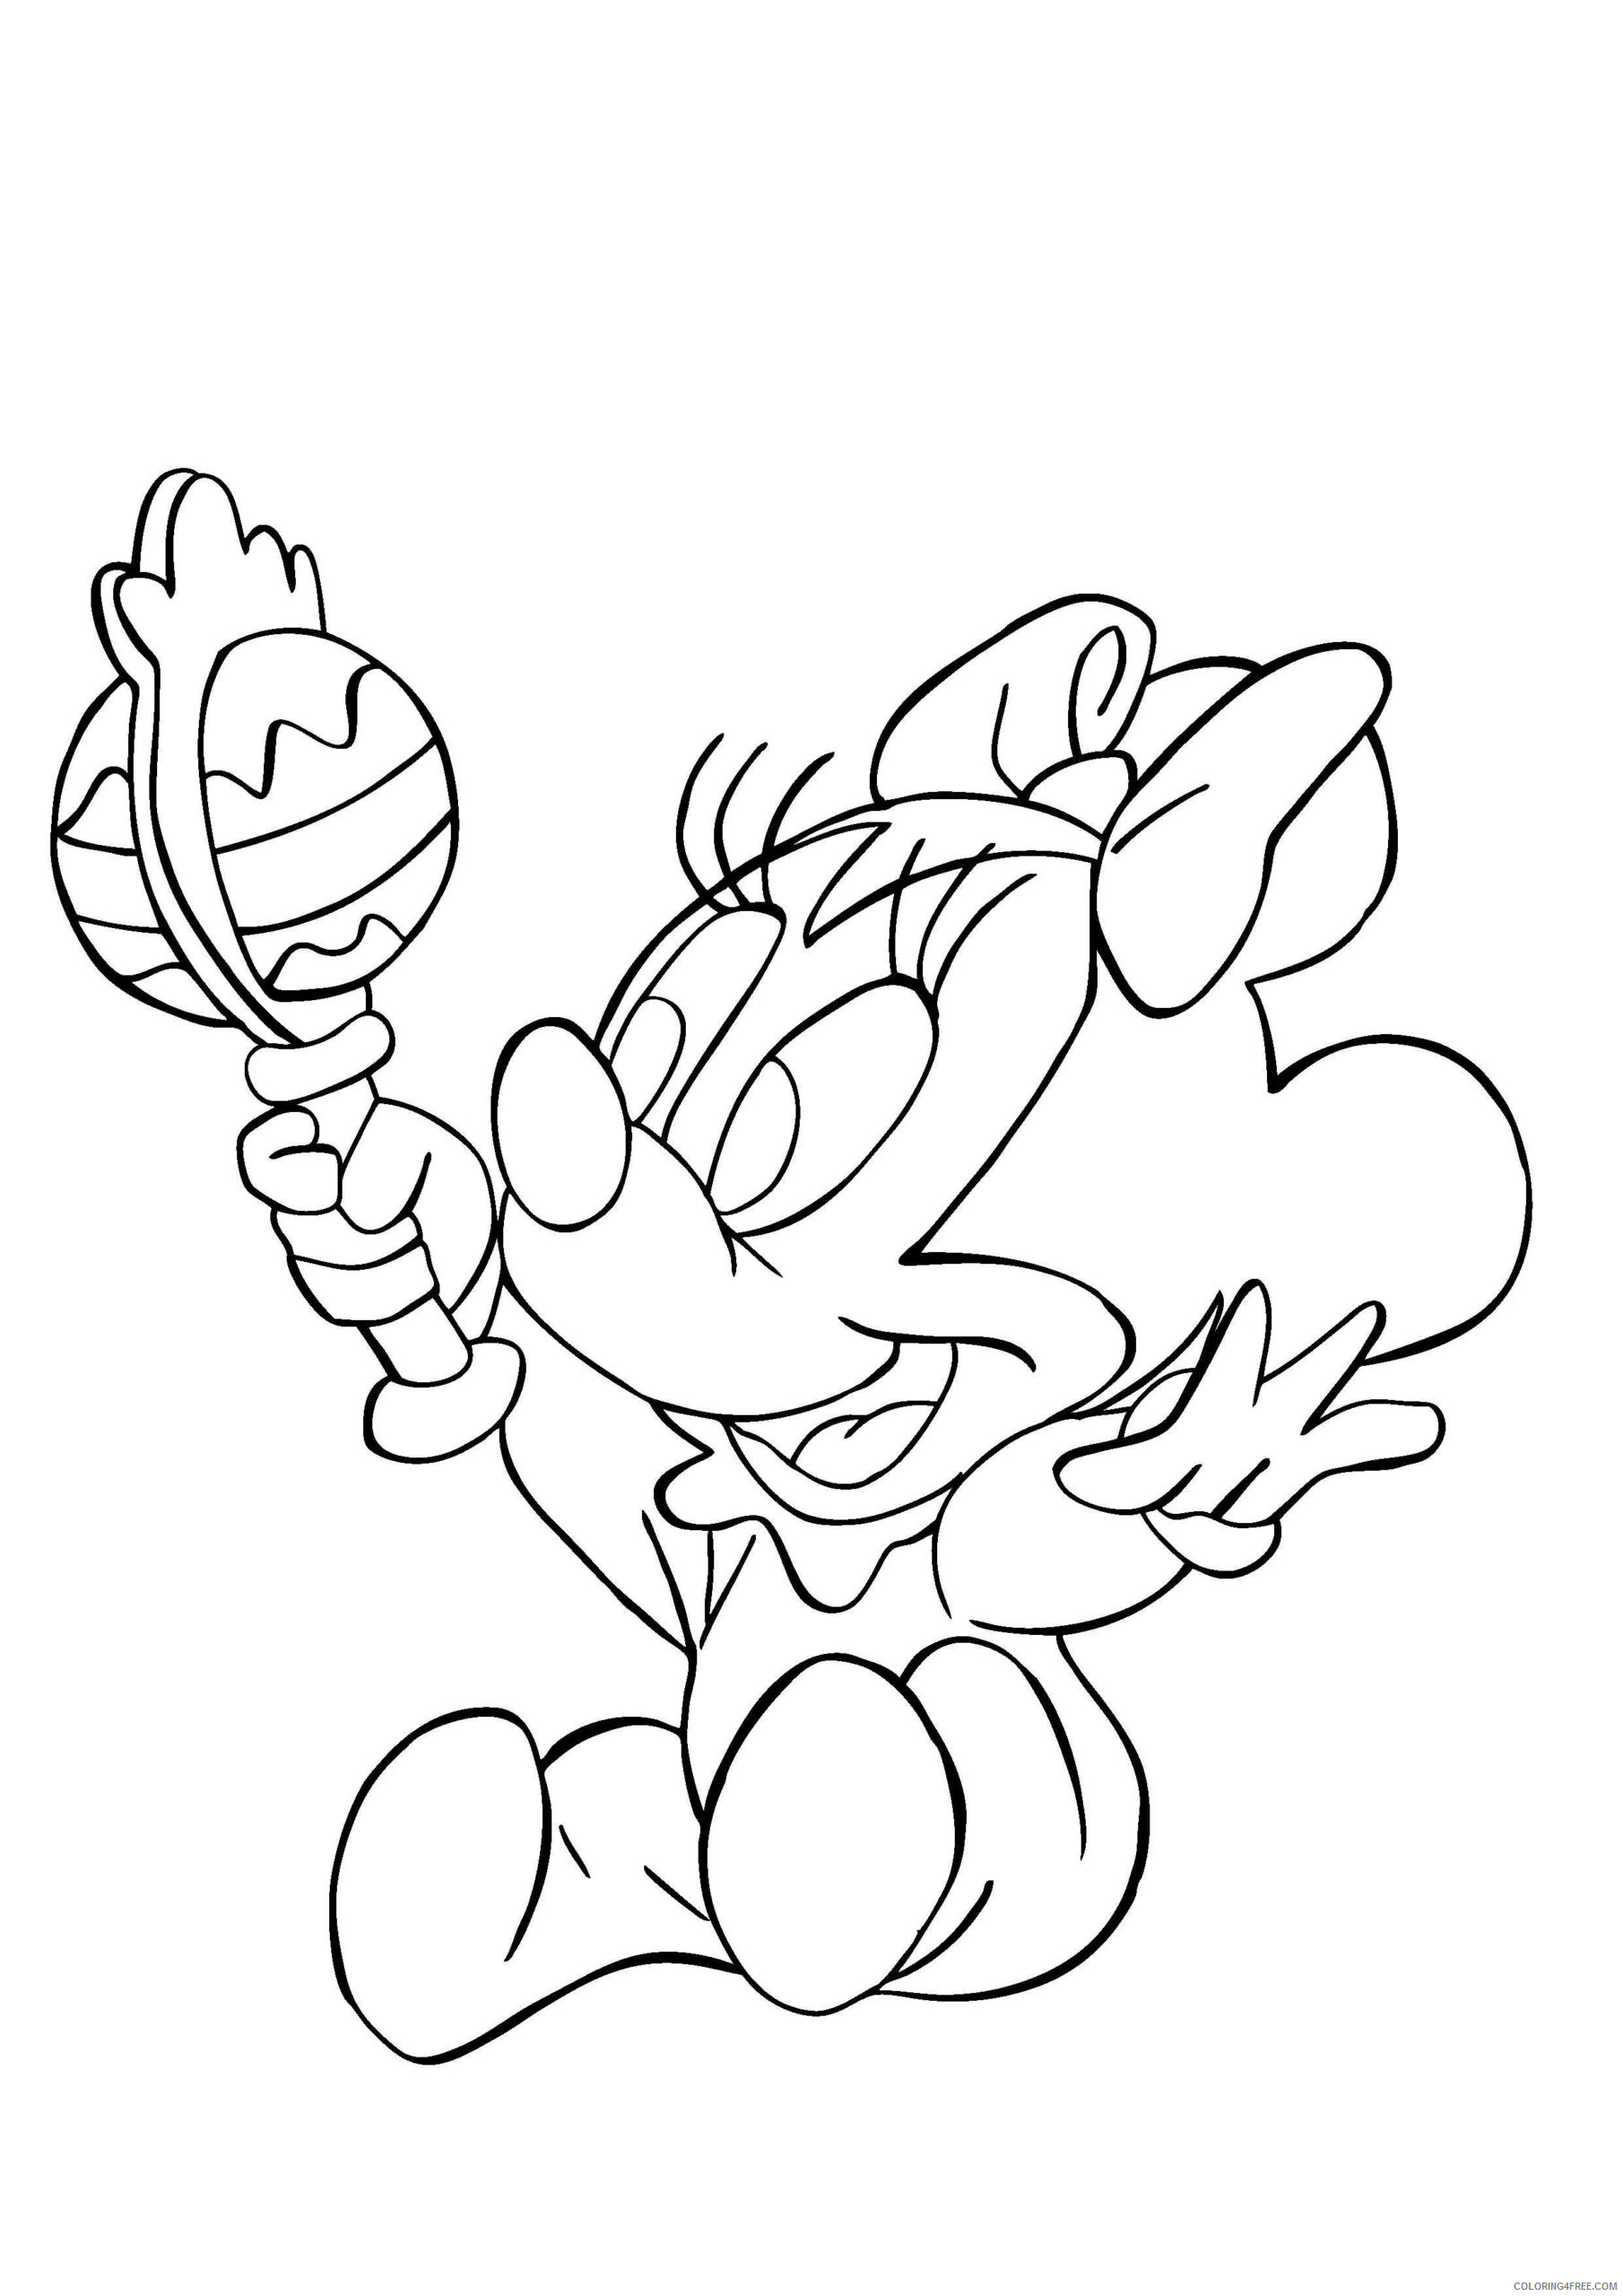 Minnie Mouse Coloring Pages Cartoons of Baby Minnie Mouse Printable 2020 4227 Coloring4free